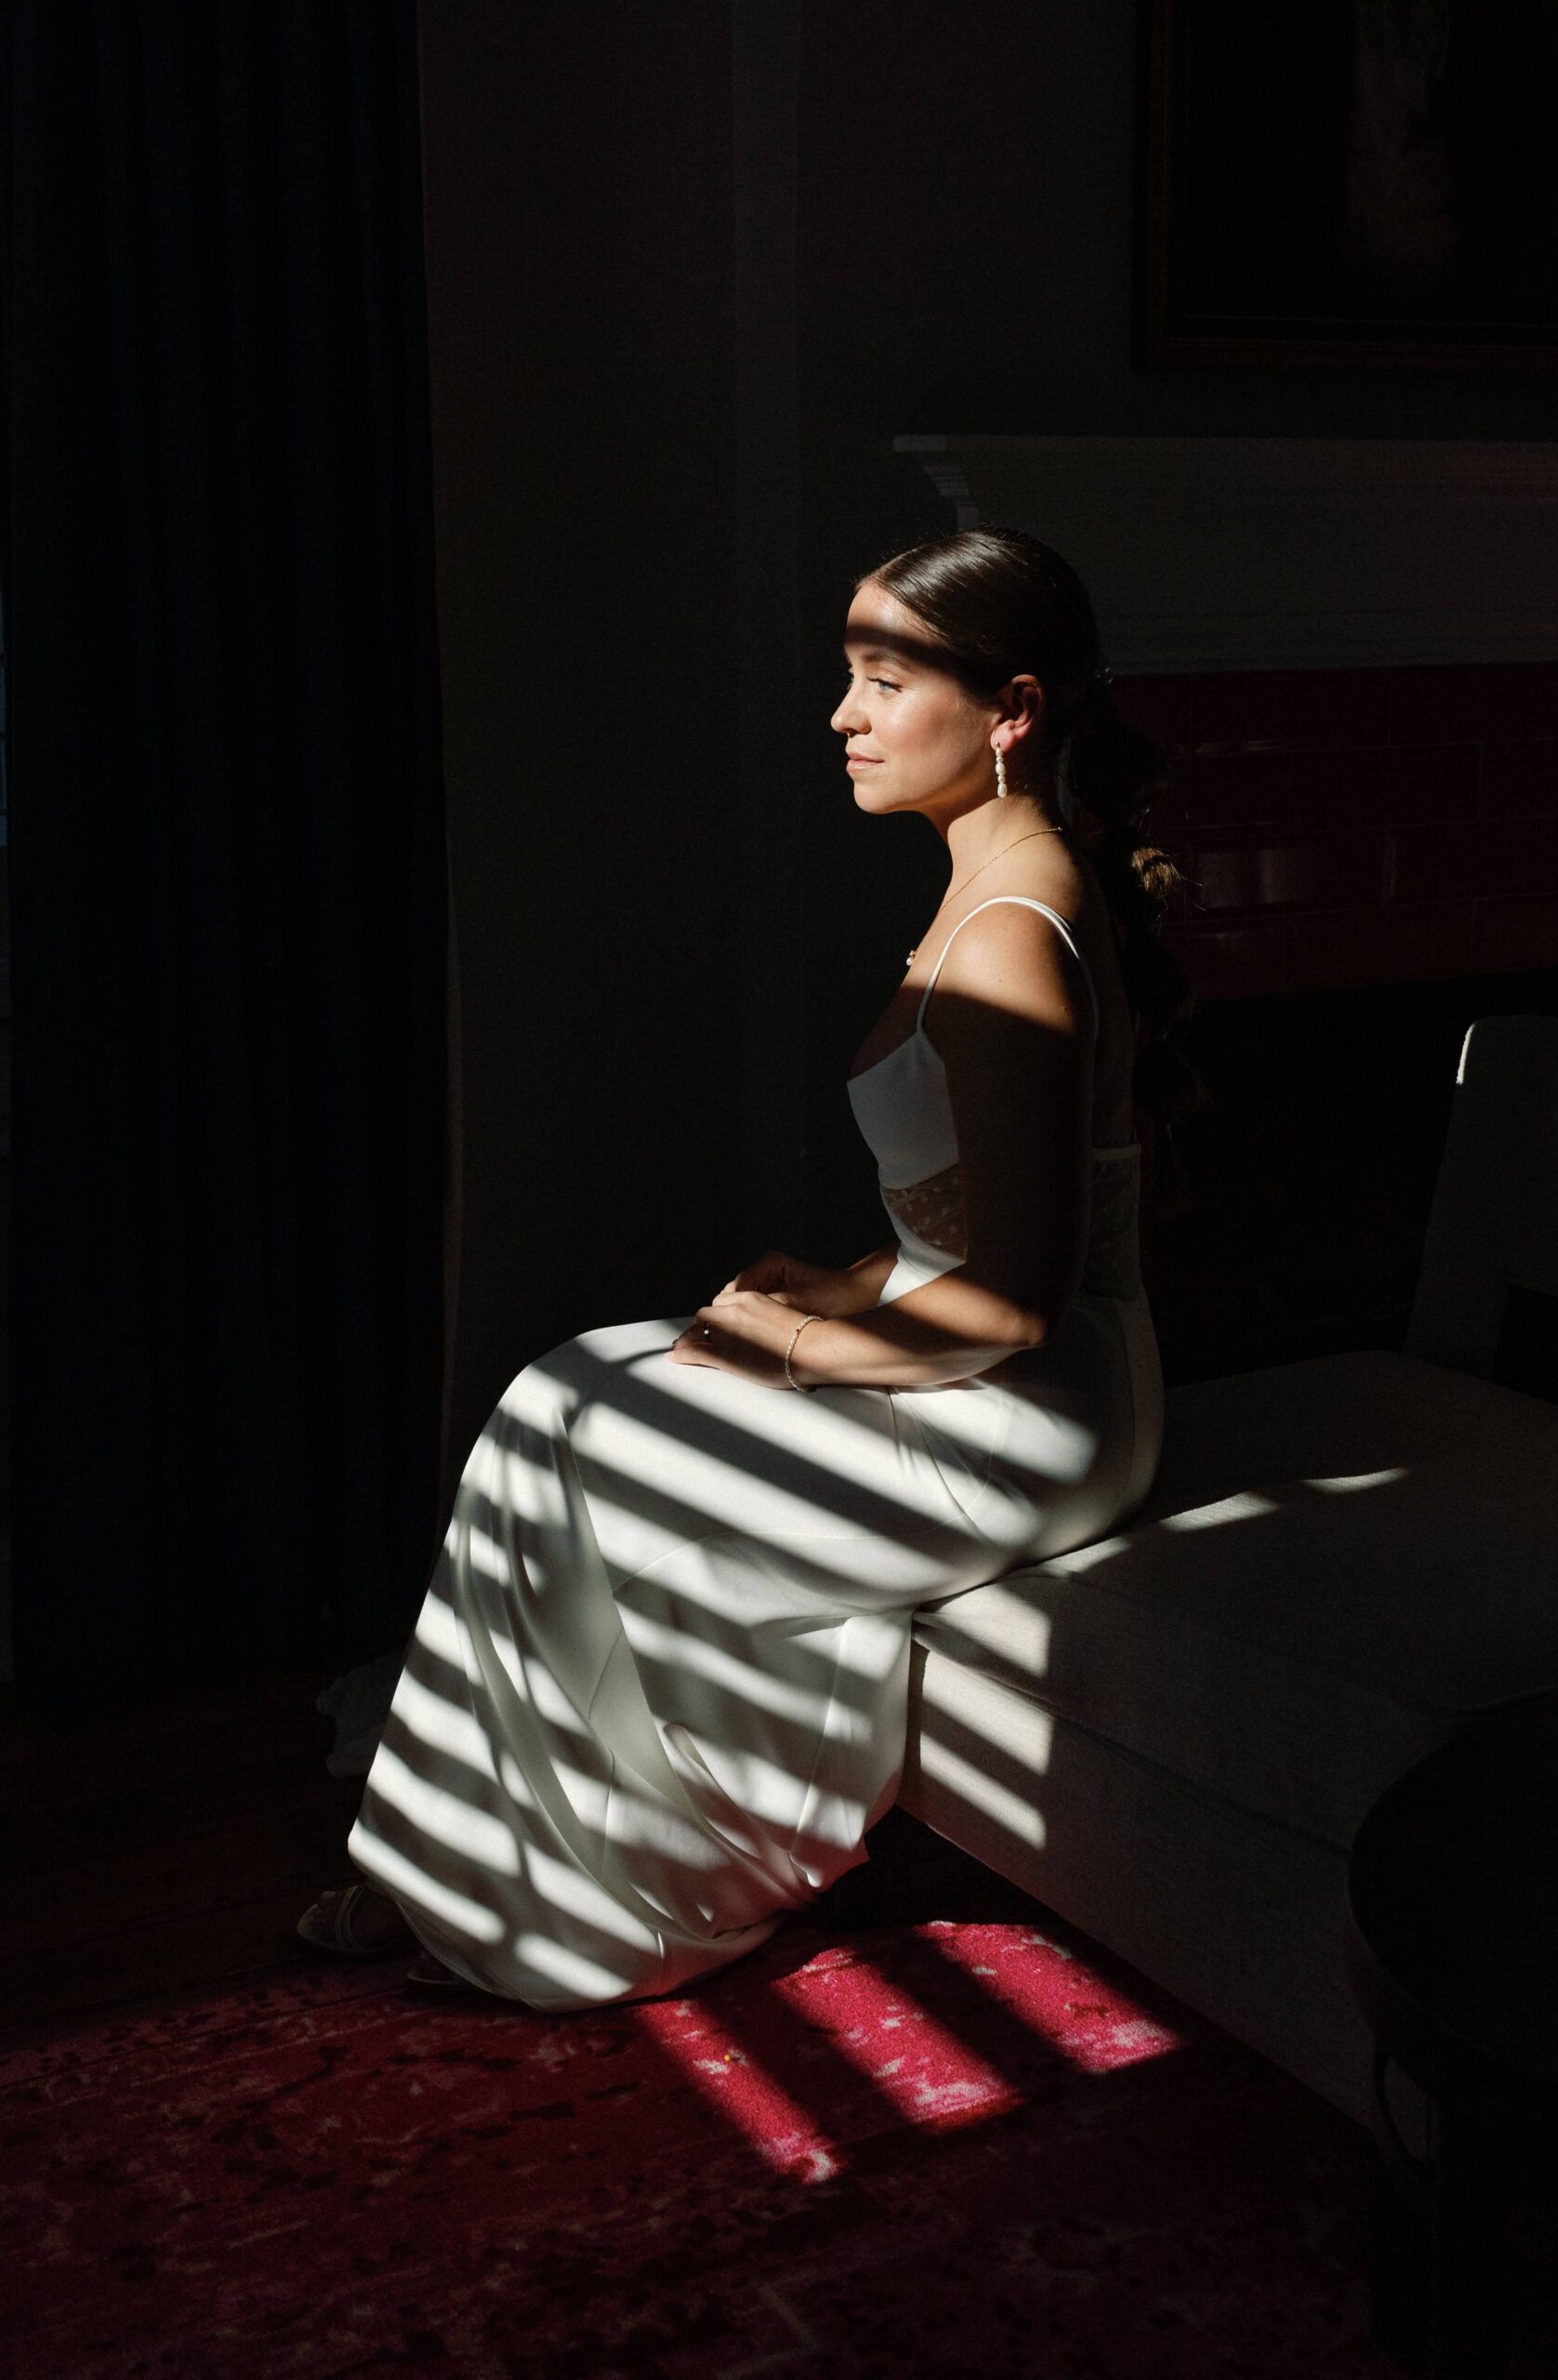 The bride is sitting in the chair with harsh light and shadows on her face.